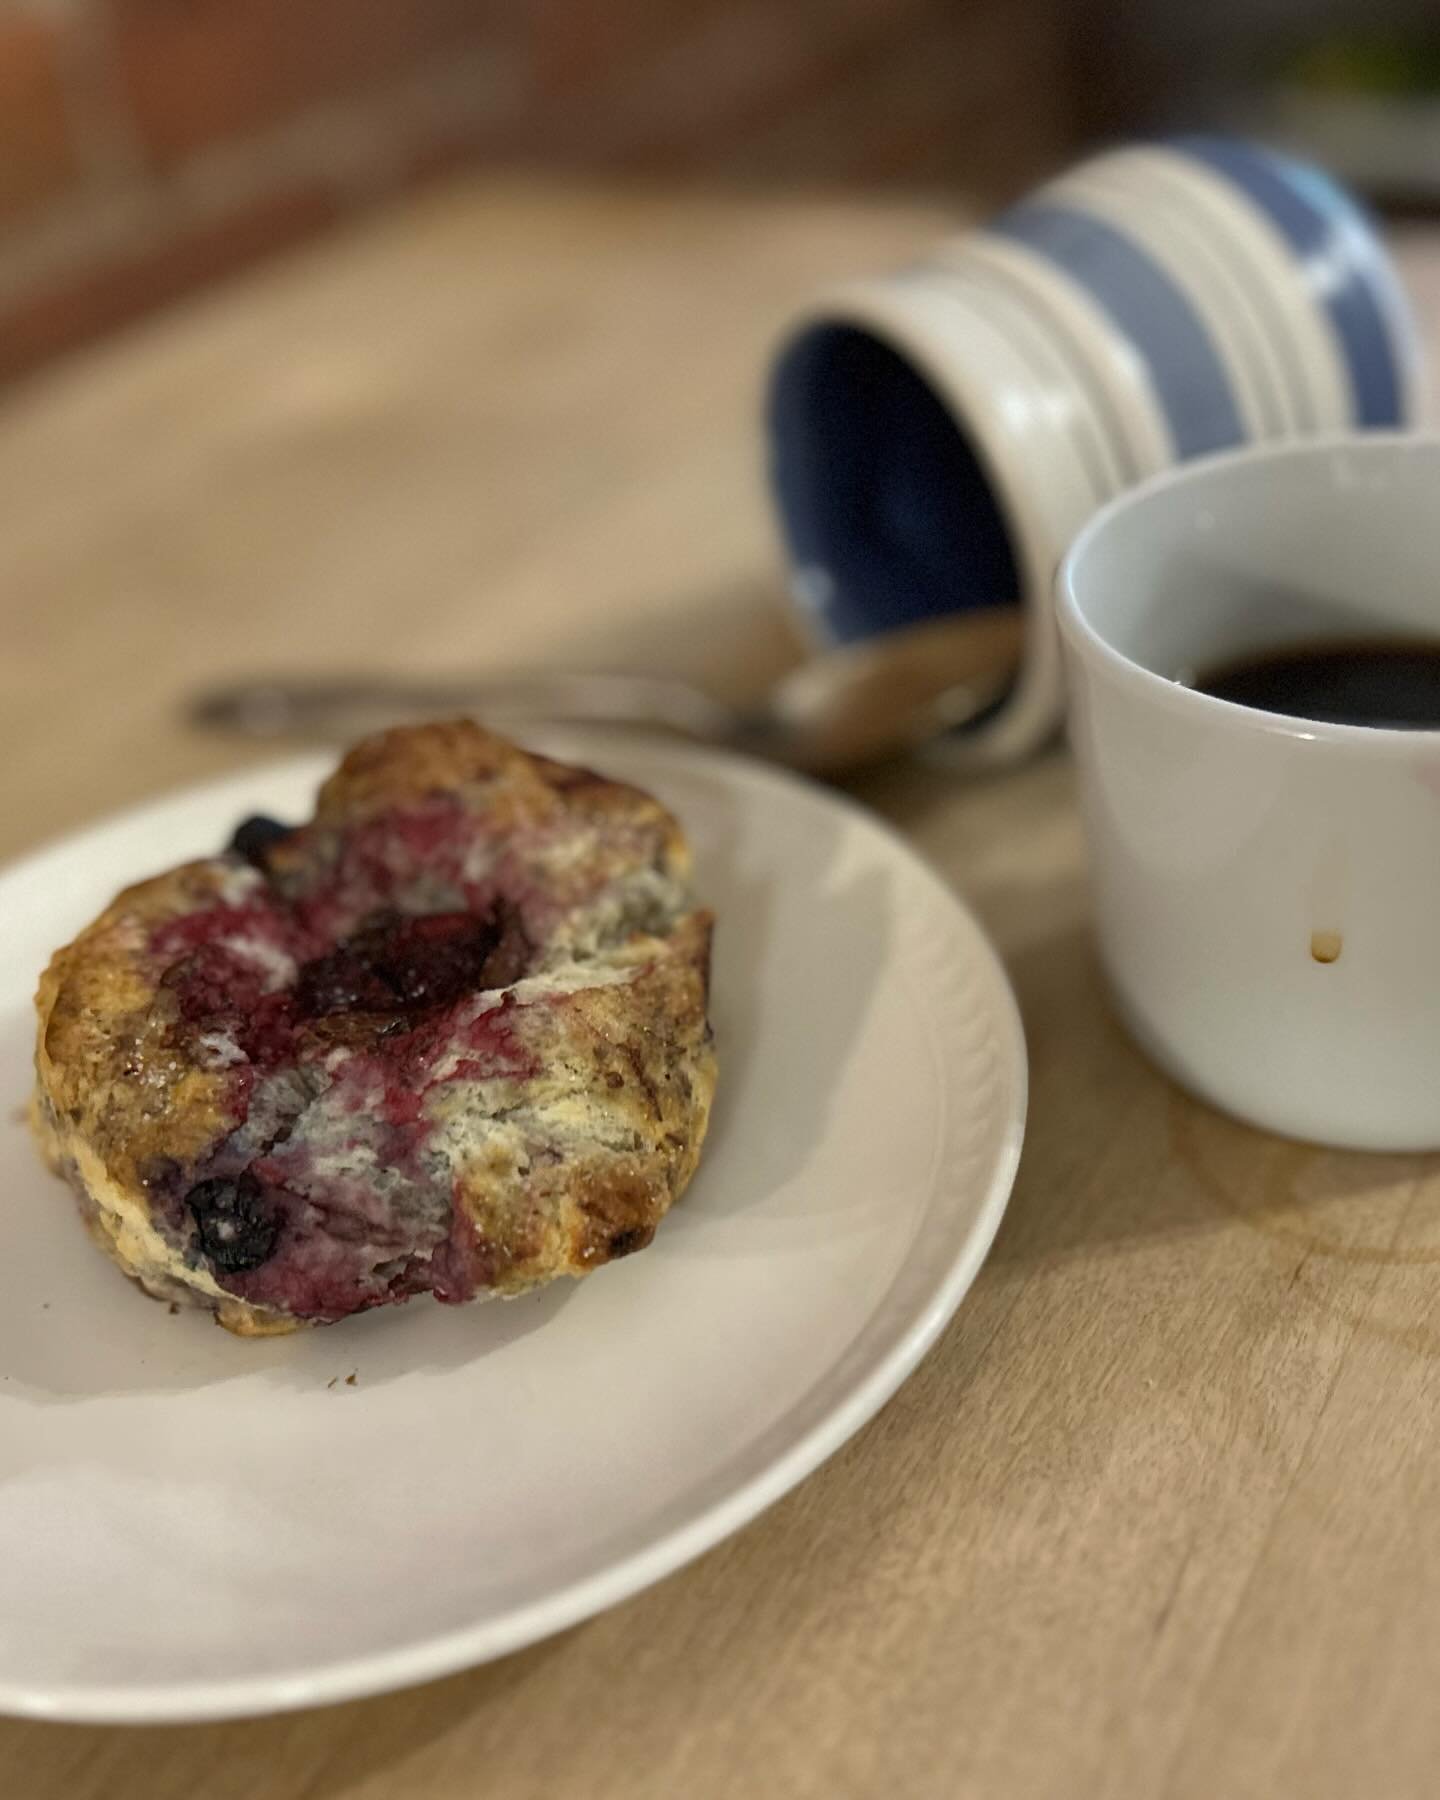 vintage coffee goes ✨indie🪩

On this rainy day, why don&rsquo;t you warm urself up with a toasty blueberry scone and nice cupa joe?